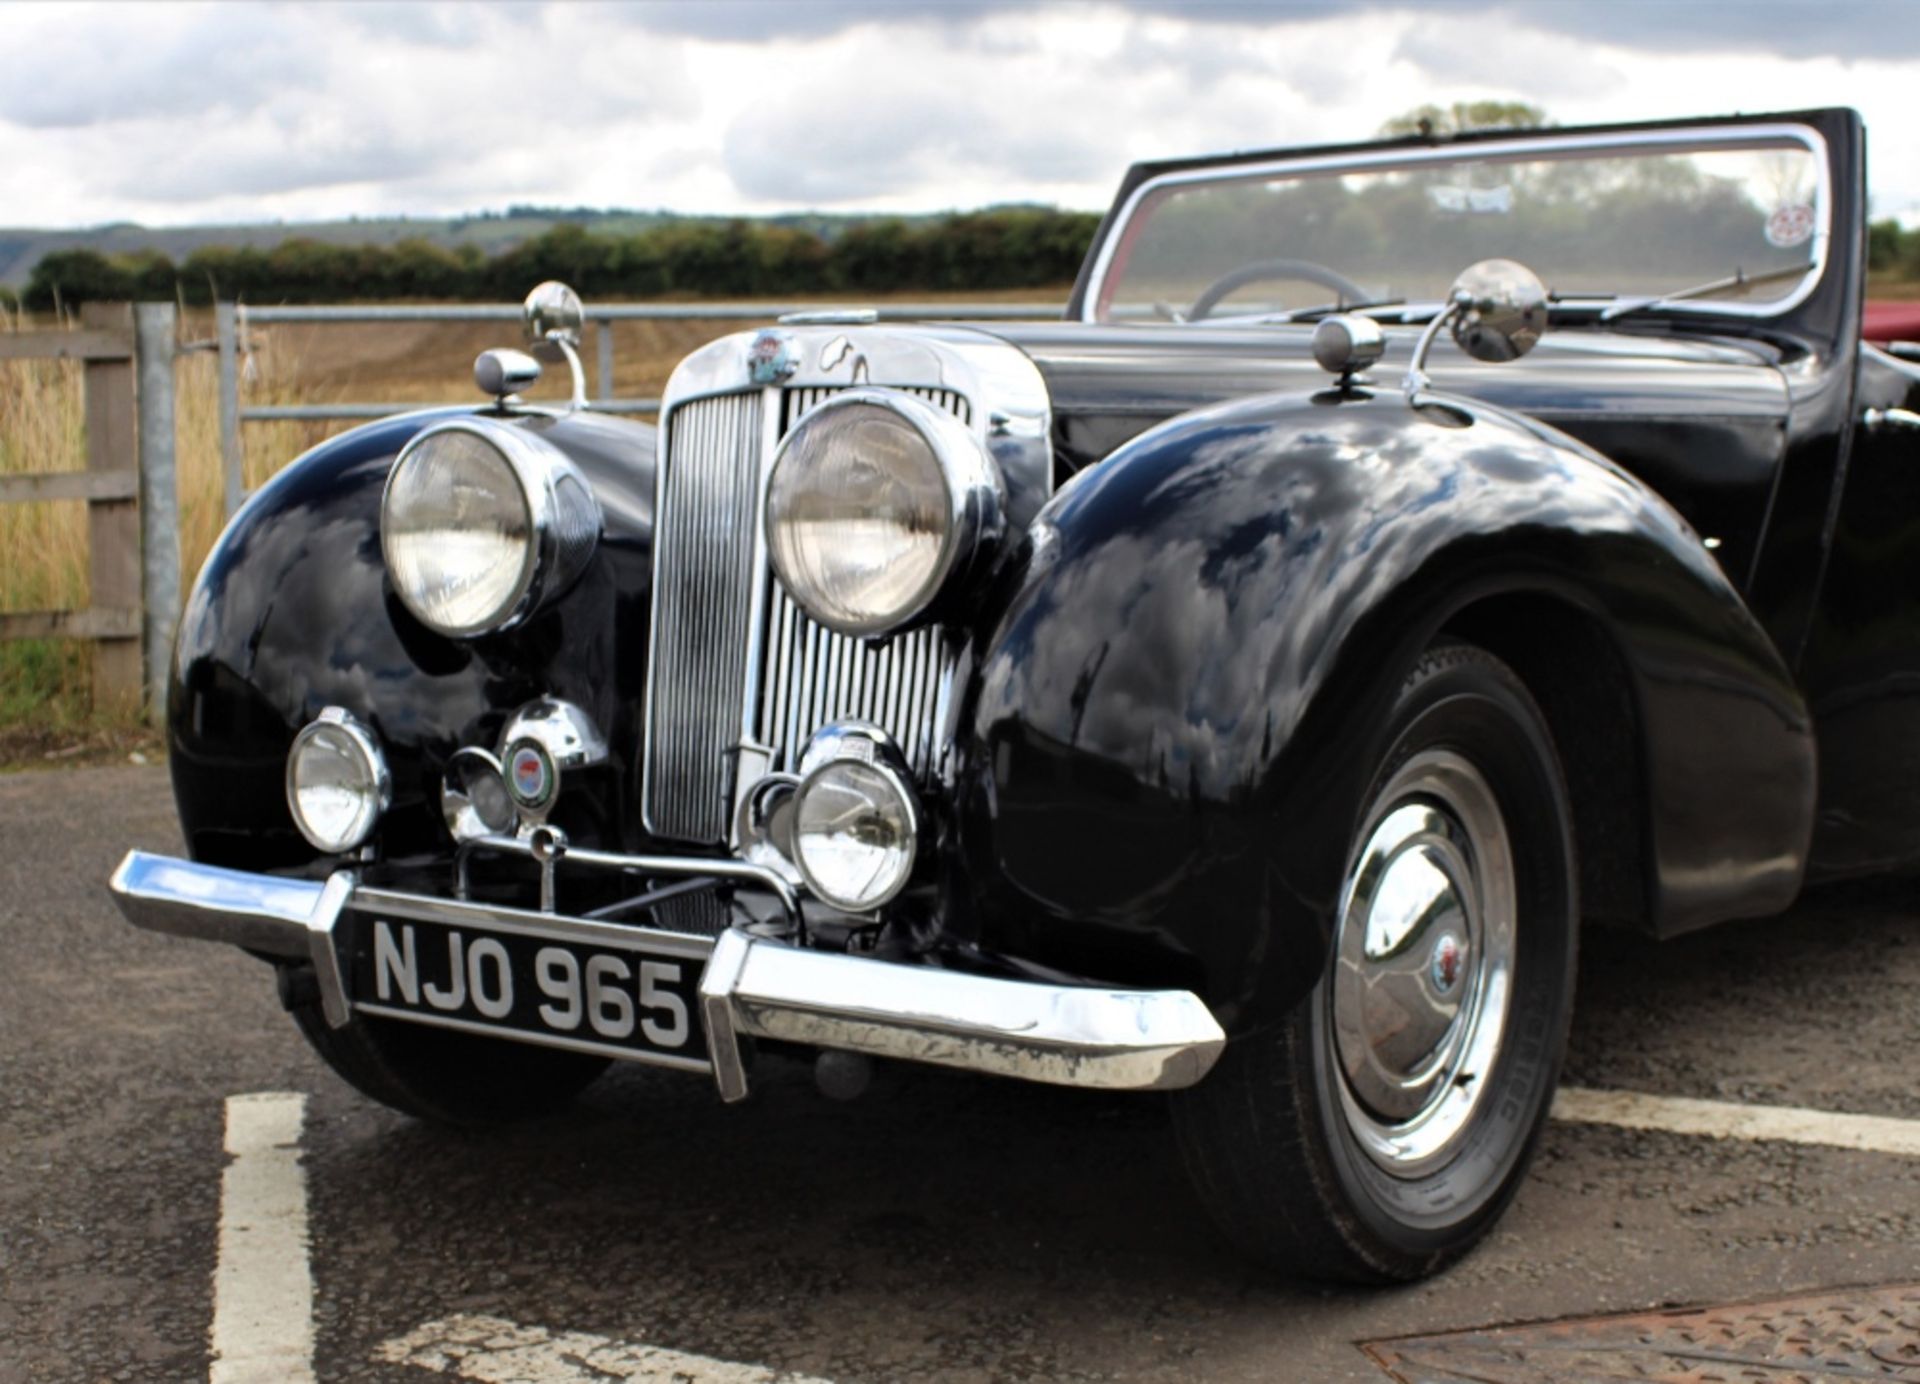 1946 TRIUMPH ROADSTER Registration Number: NJO 765 Chassis Number: TRA 1283 Recorded Mileage: 6, - Image 3 of 15